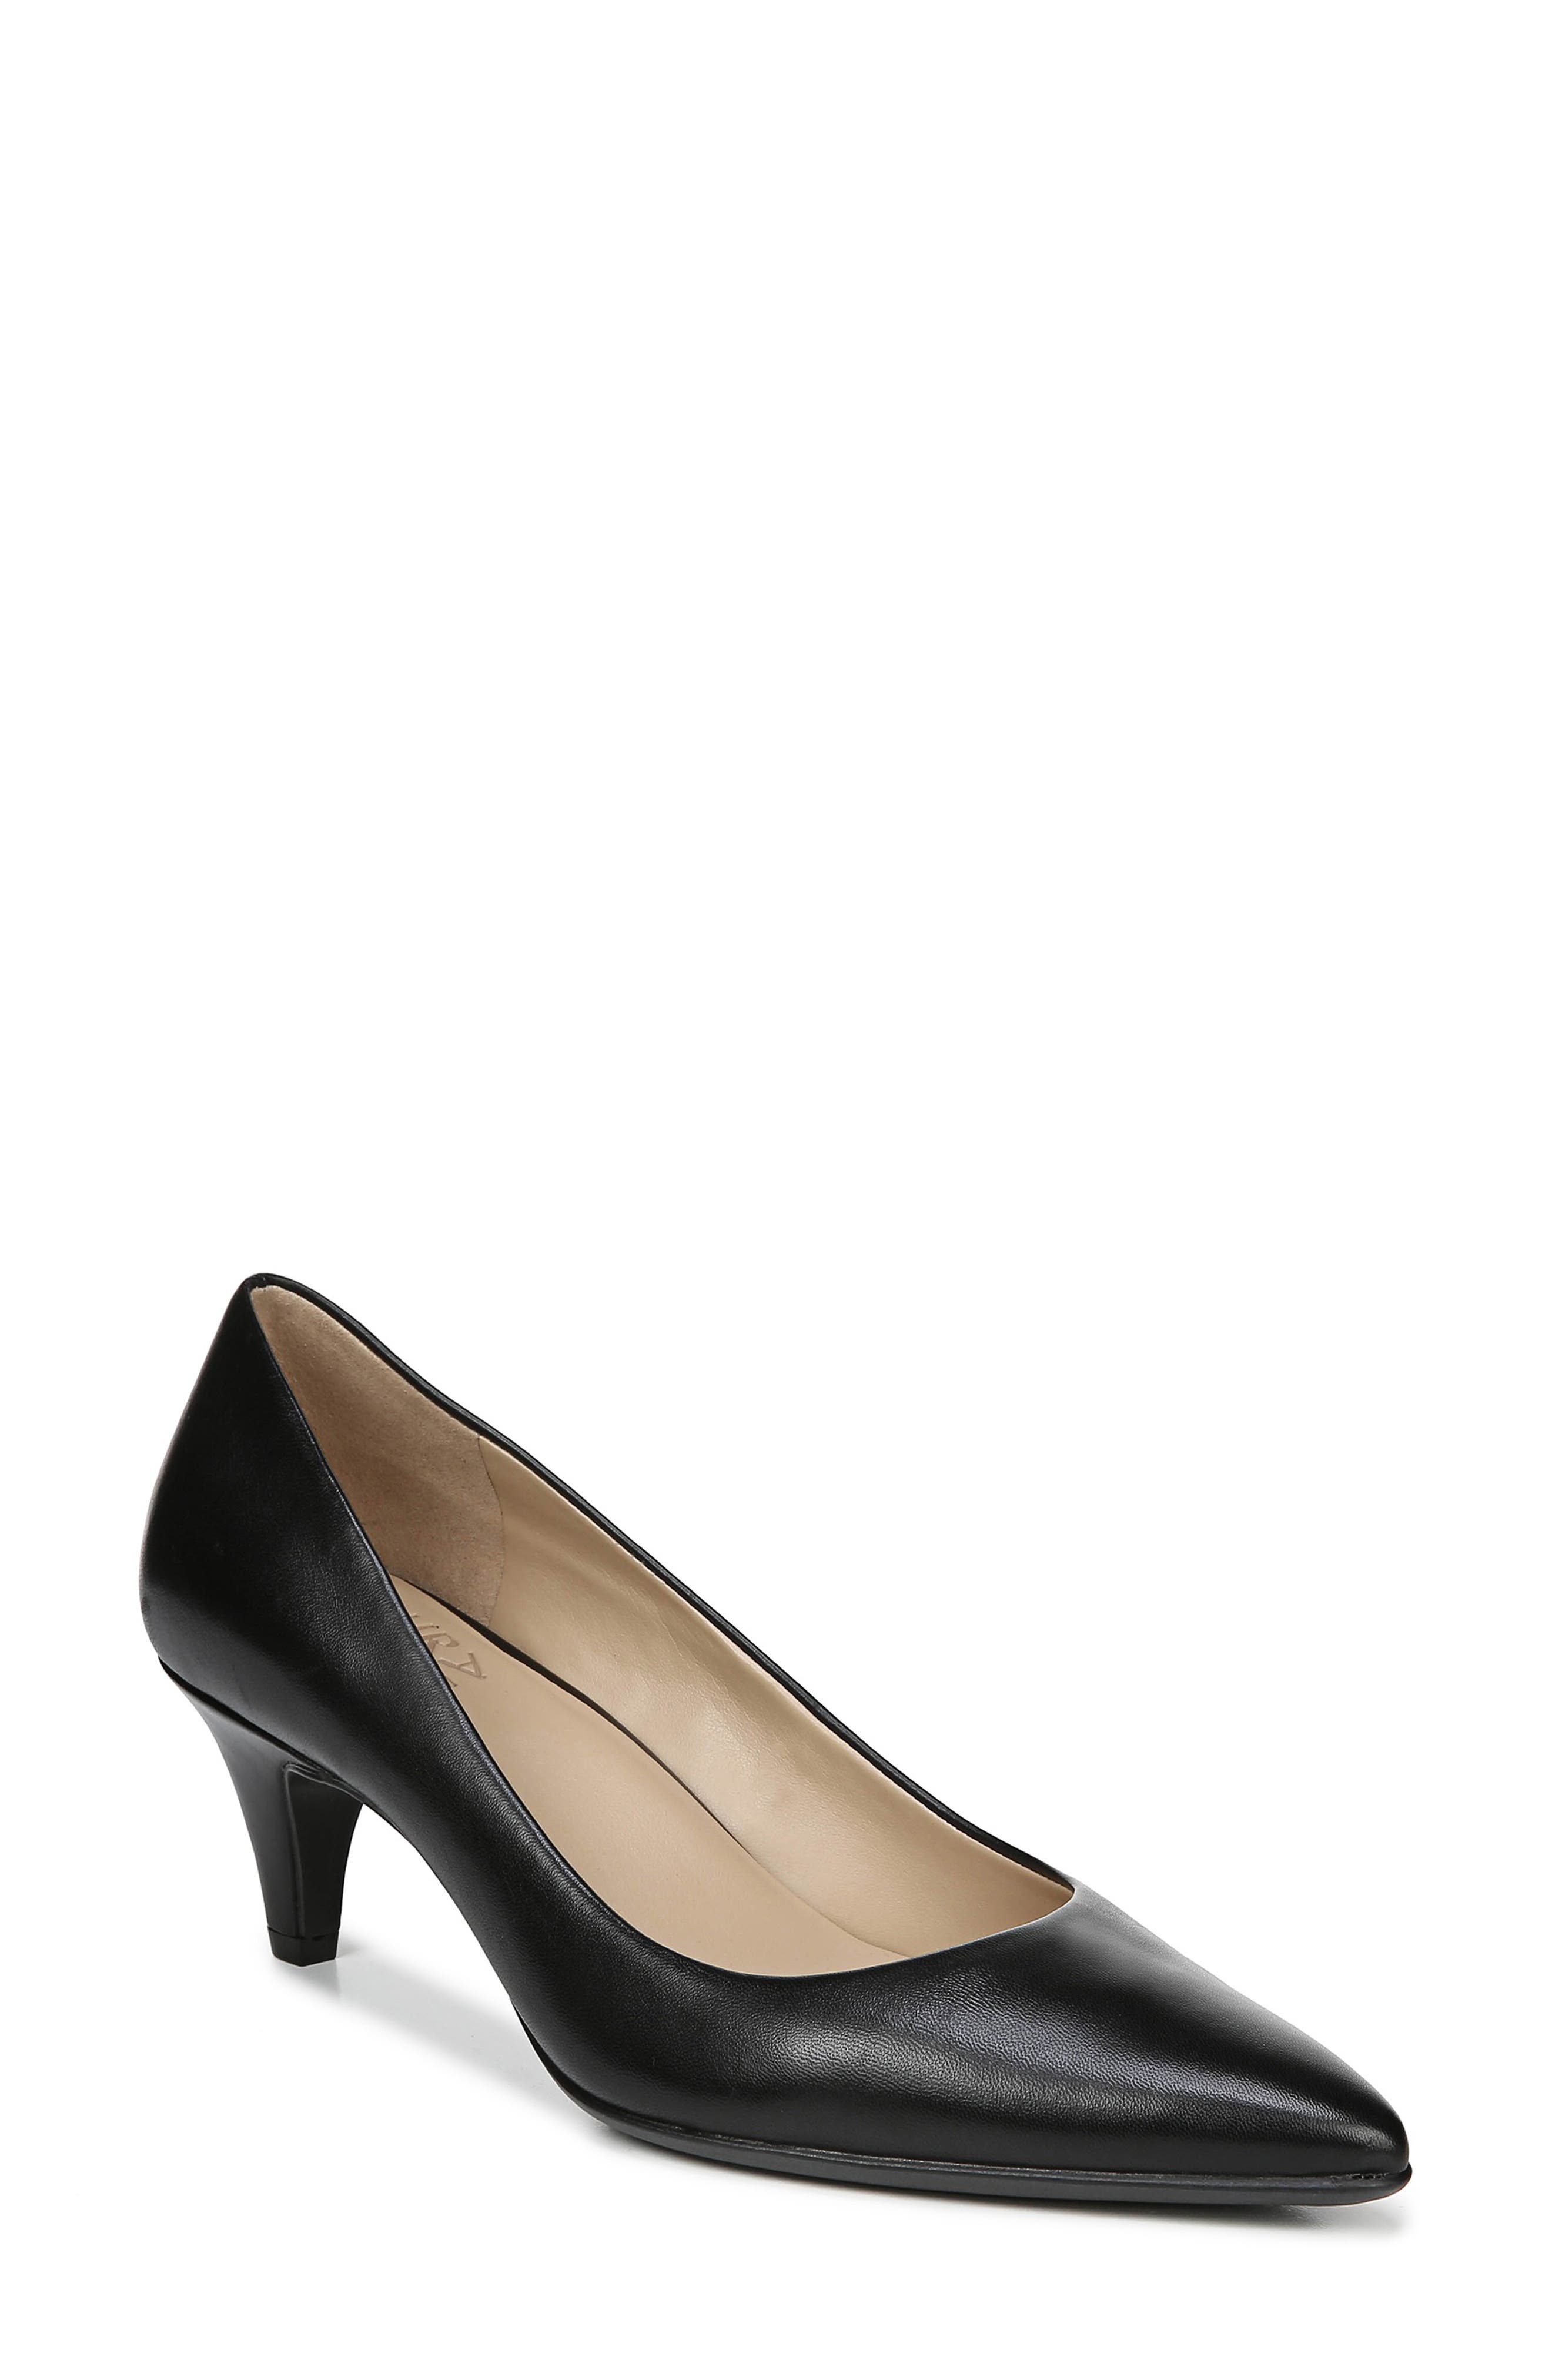 nordstrom wide shoes womens